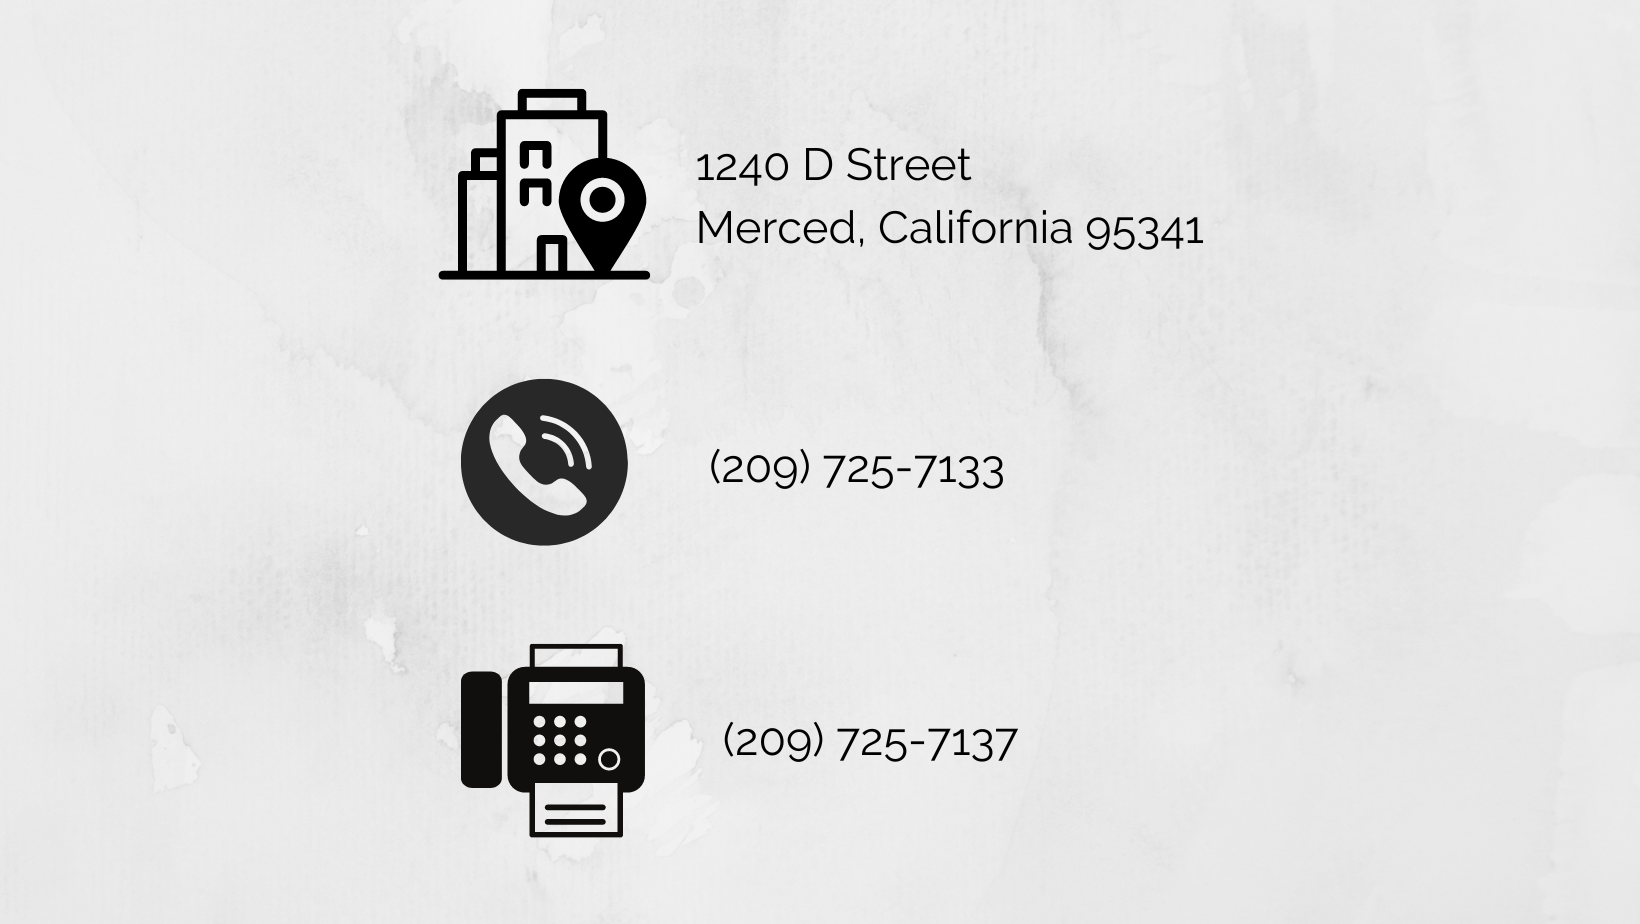 Business Office Contact Information, 1240 D Street, Merced, California 95341, Phone Number 209 725 7133, fax number 209 725 7137